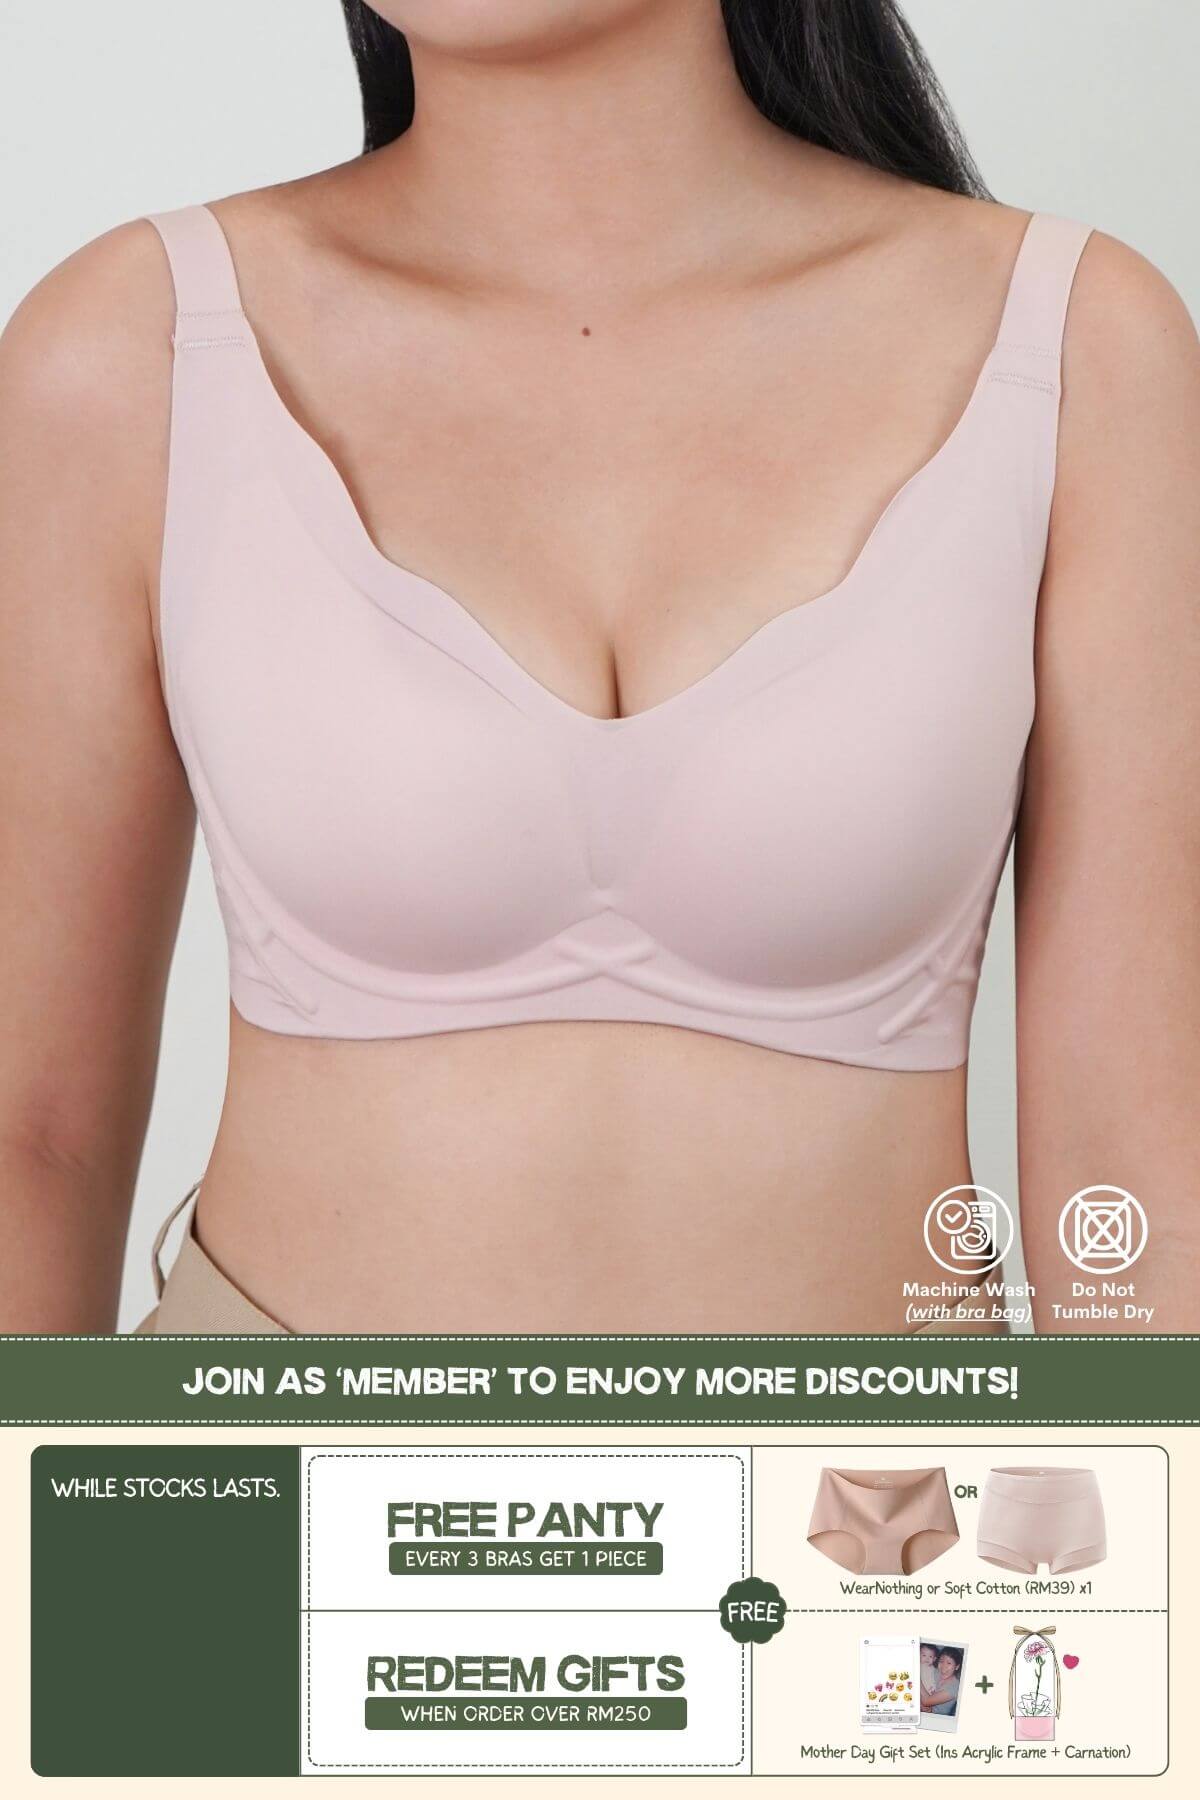 [Star Product] Wavy Support Antigravity Seamless Bra In Chalk Pink - Adelais Official - Bra - Coverage & Push Up & Seamless